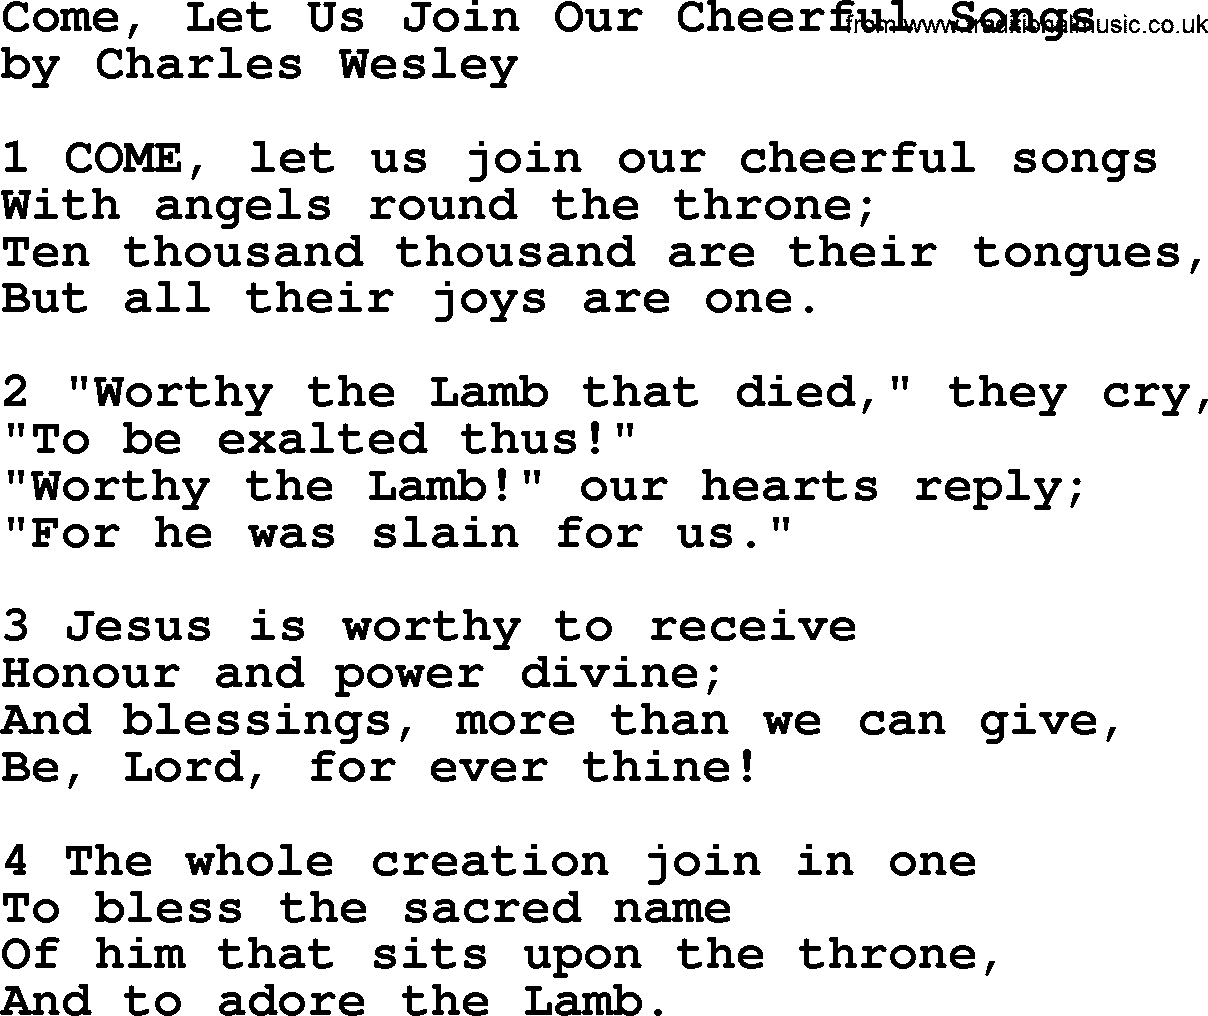 Charles Wesley hymn: Come, Let Us Join Our Cheerful Songs, lyrics